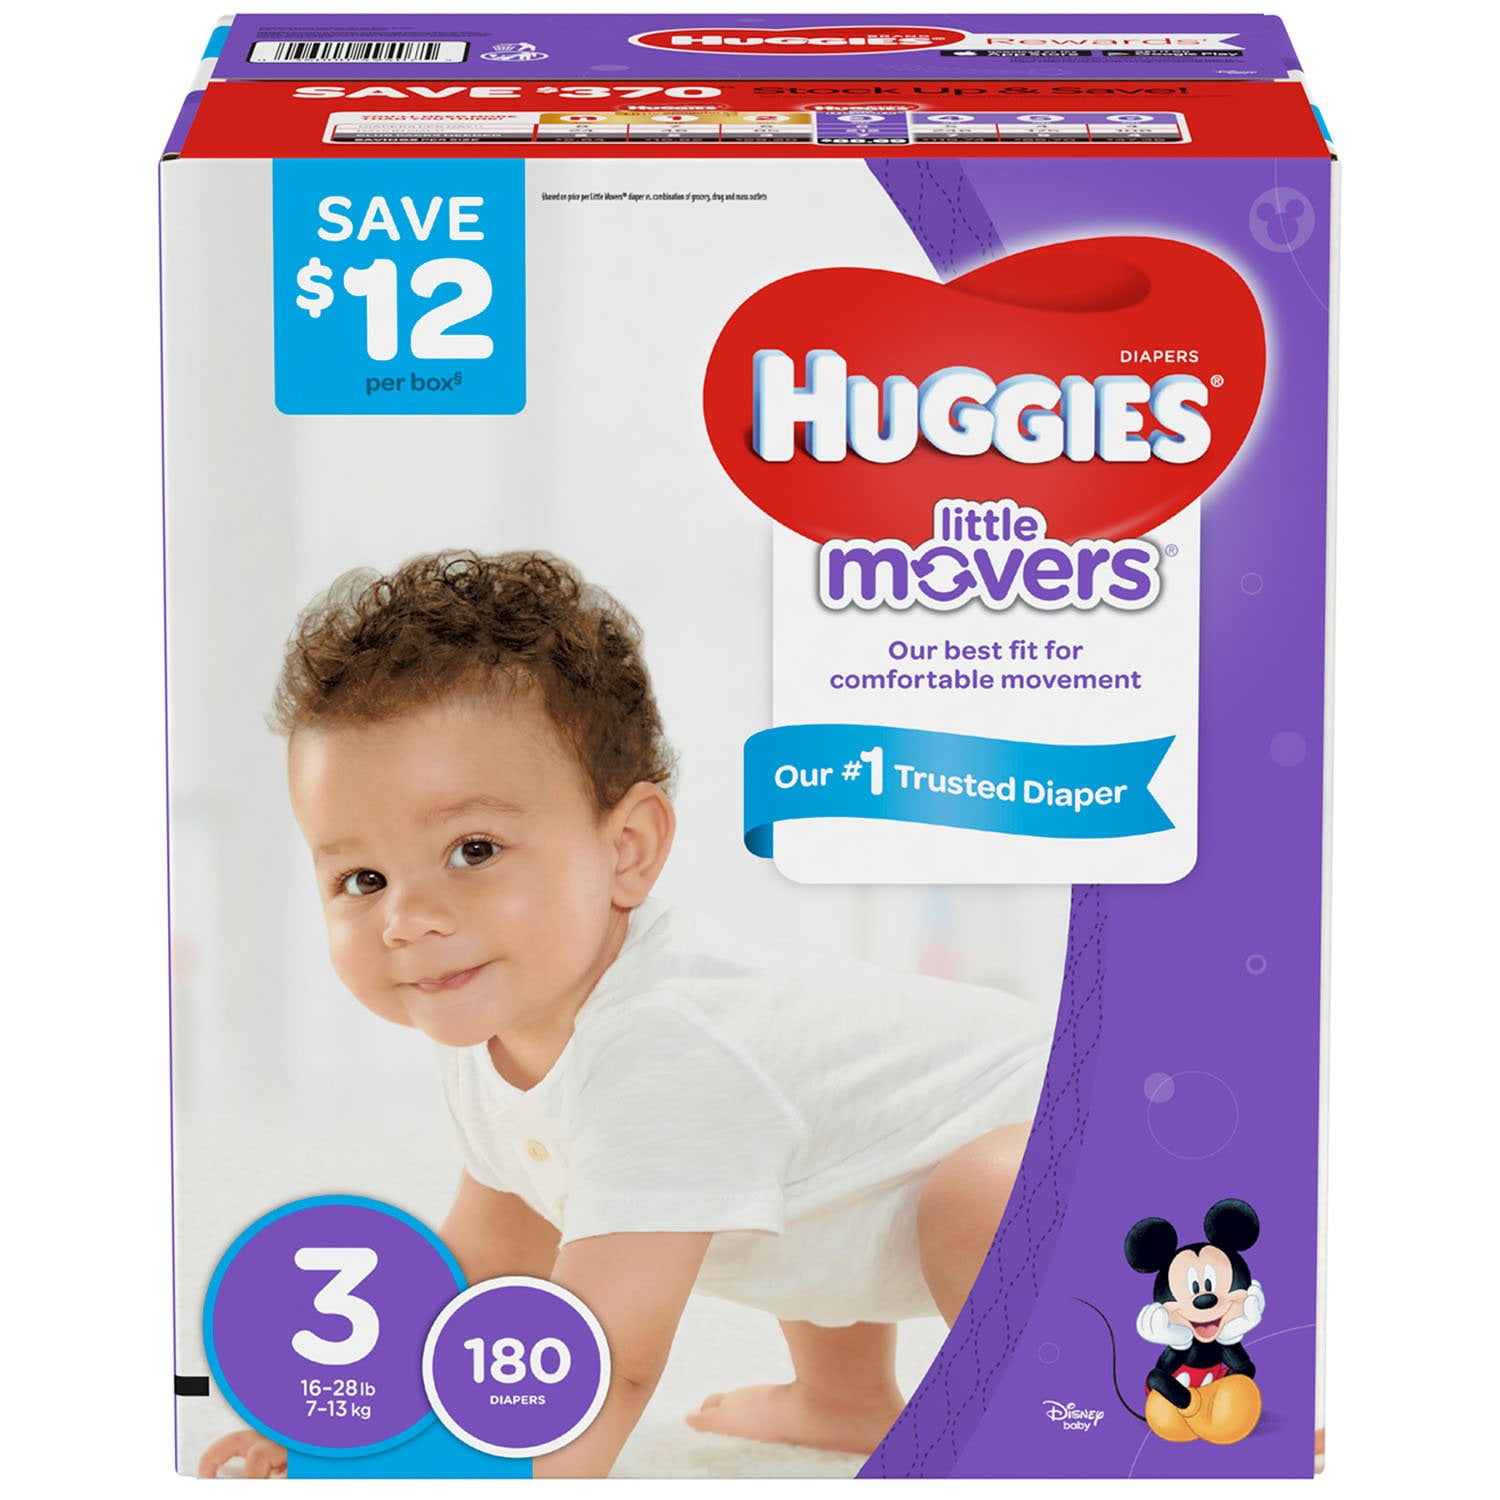 16-28lbs *Free 2 day shipping HUGGIES Little Movers Disposable Diapers Size 3 